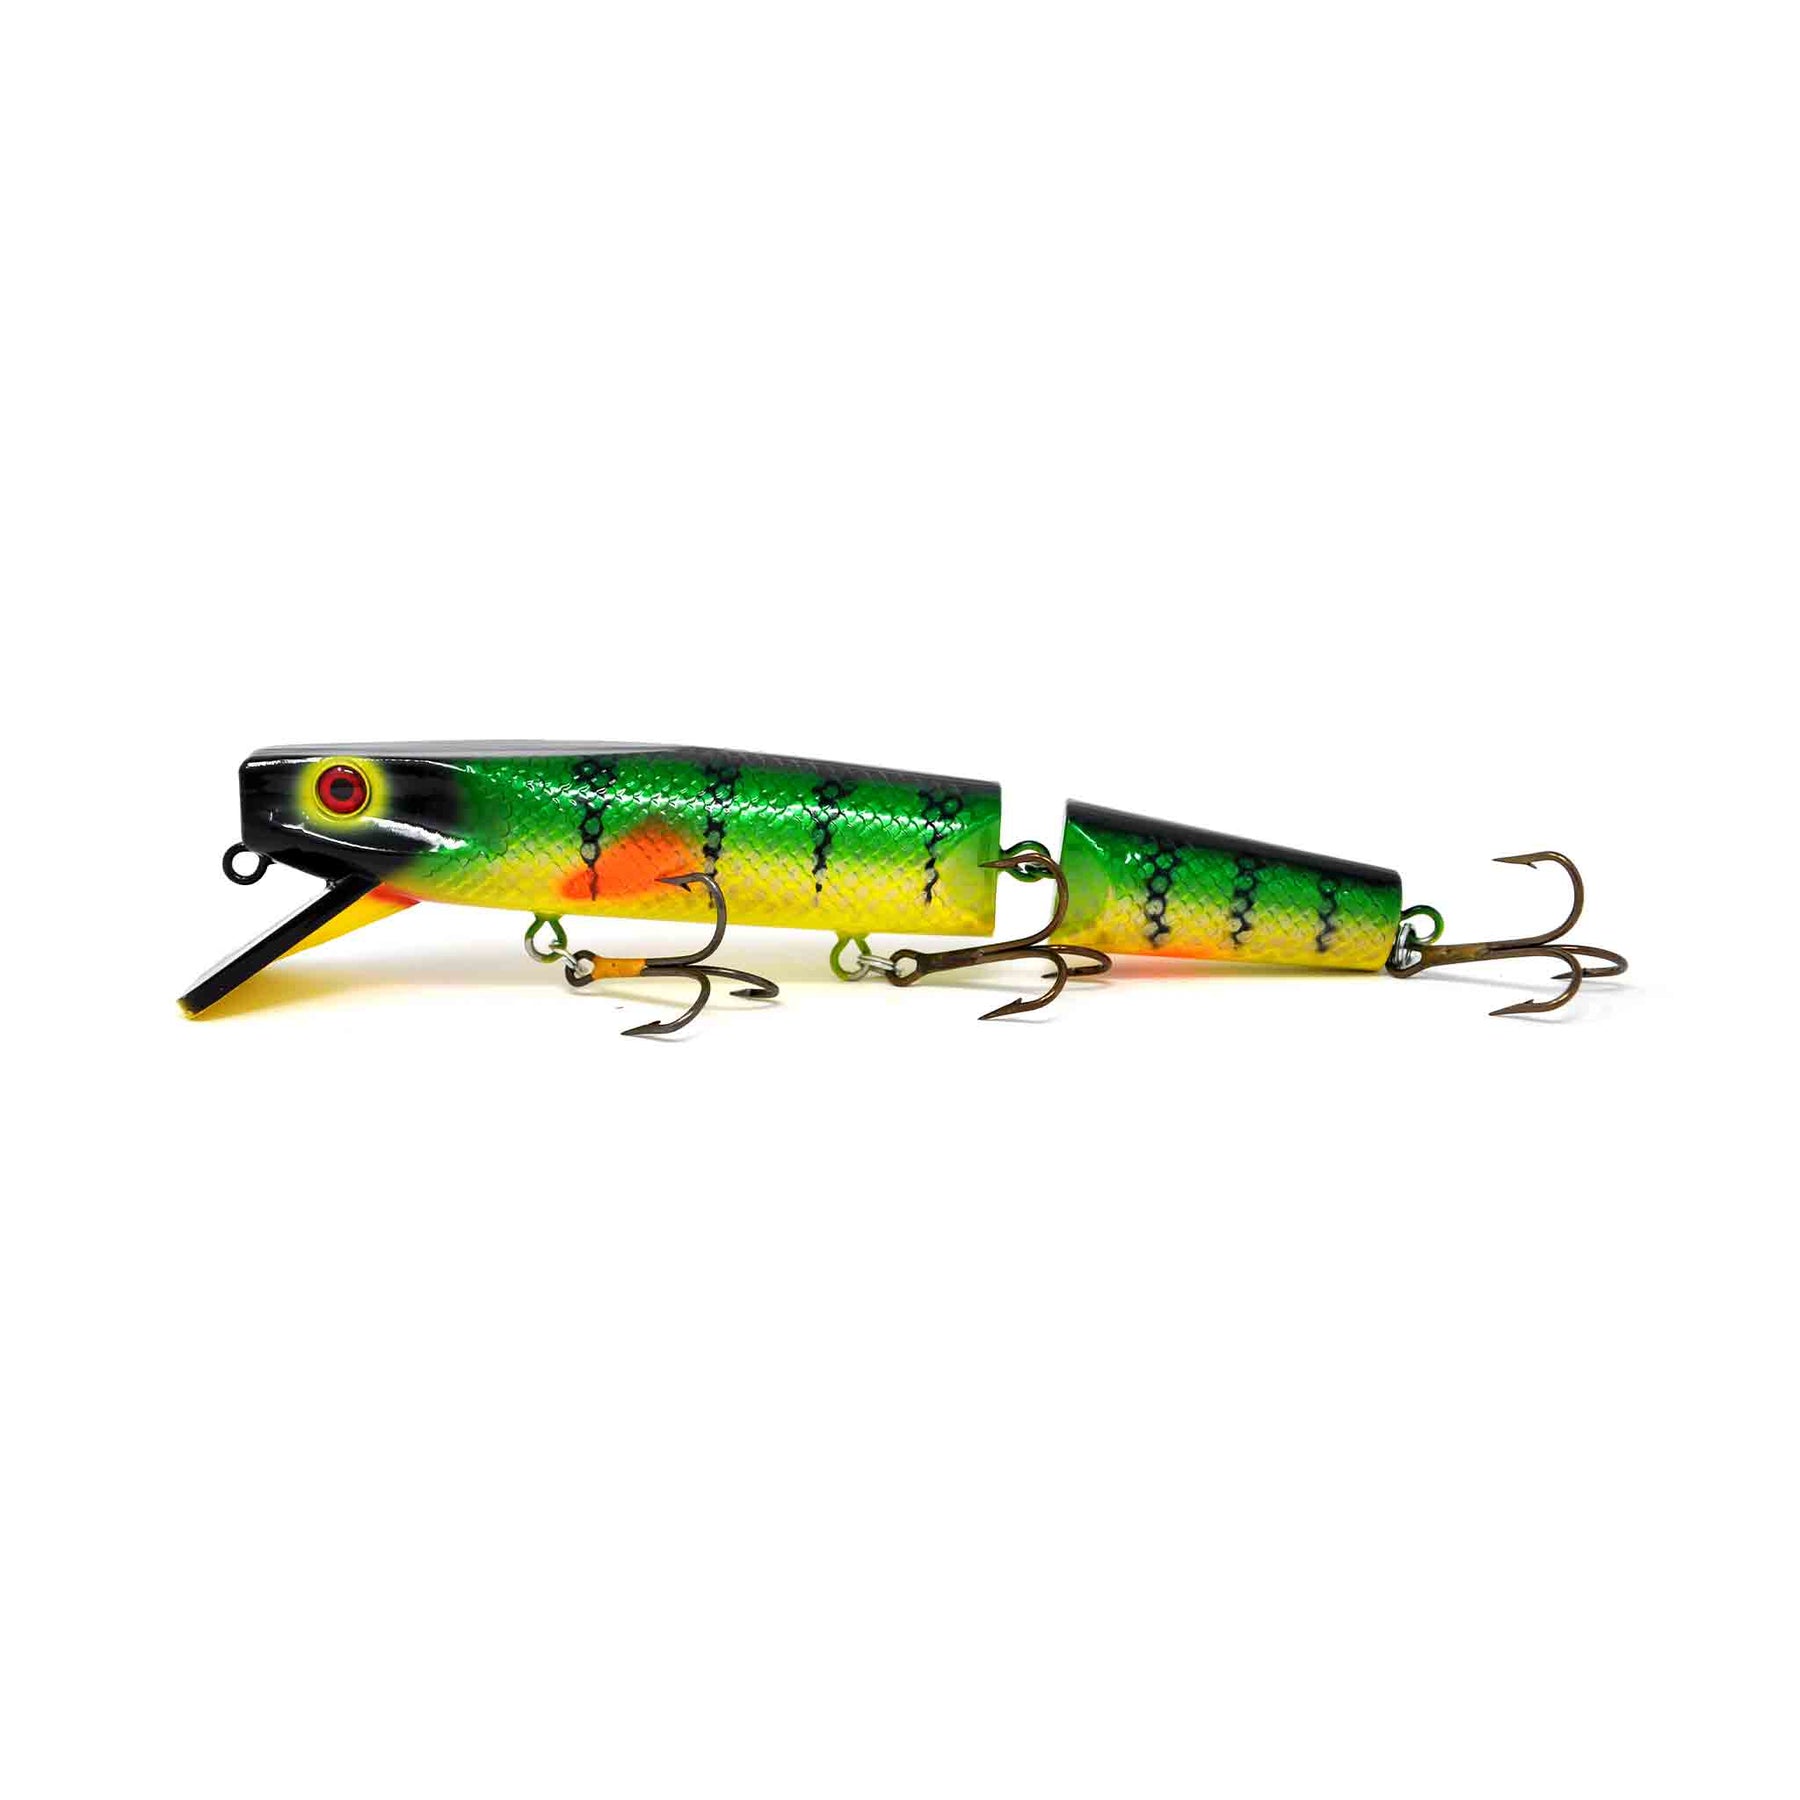 Drifter Tackle Muskie Stalker 10 Jointed / Perch